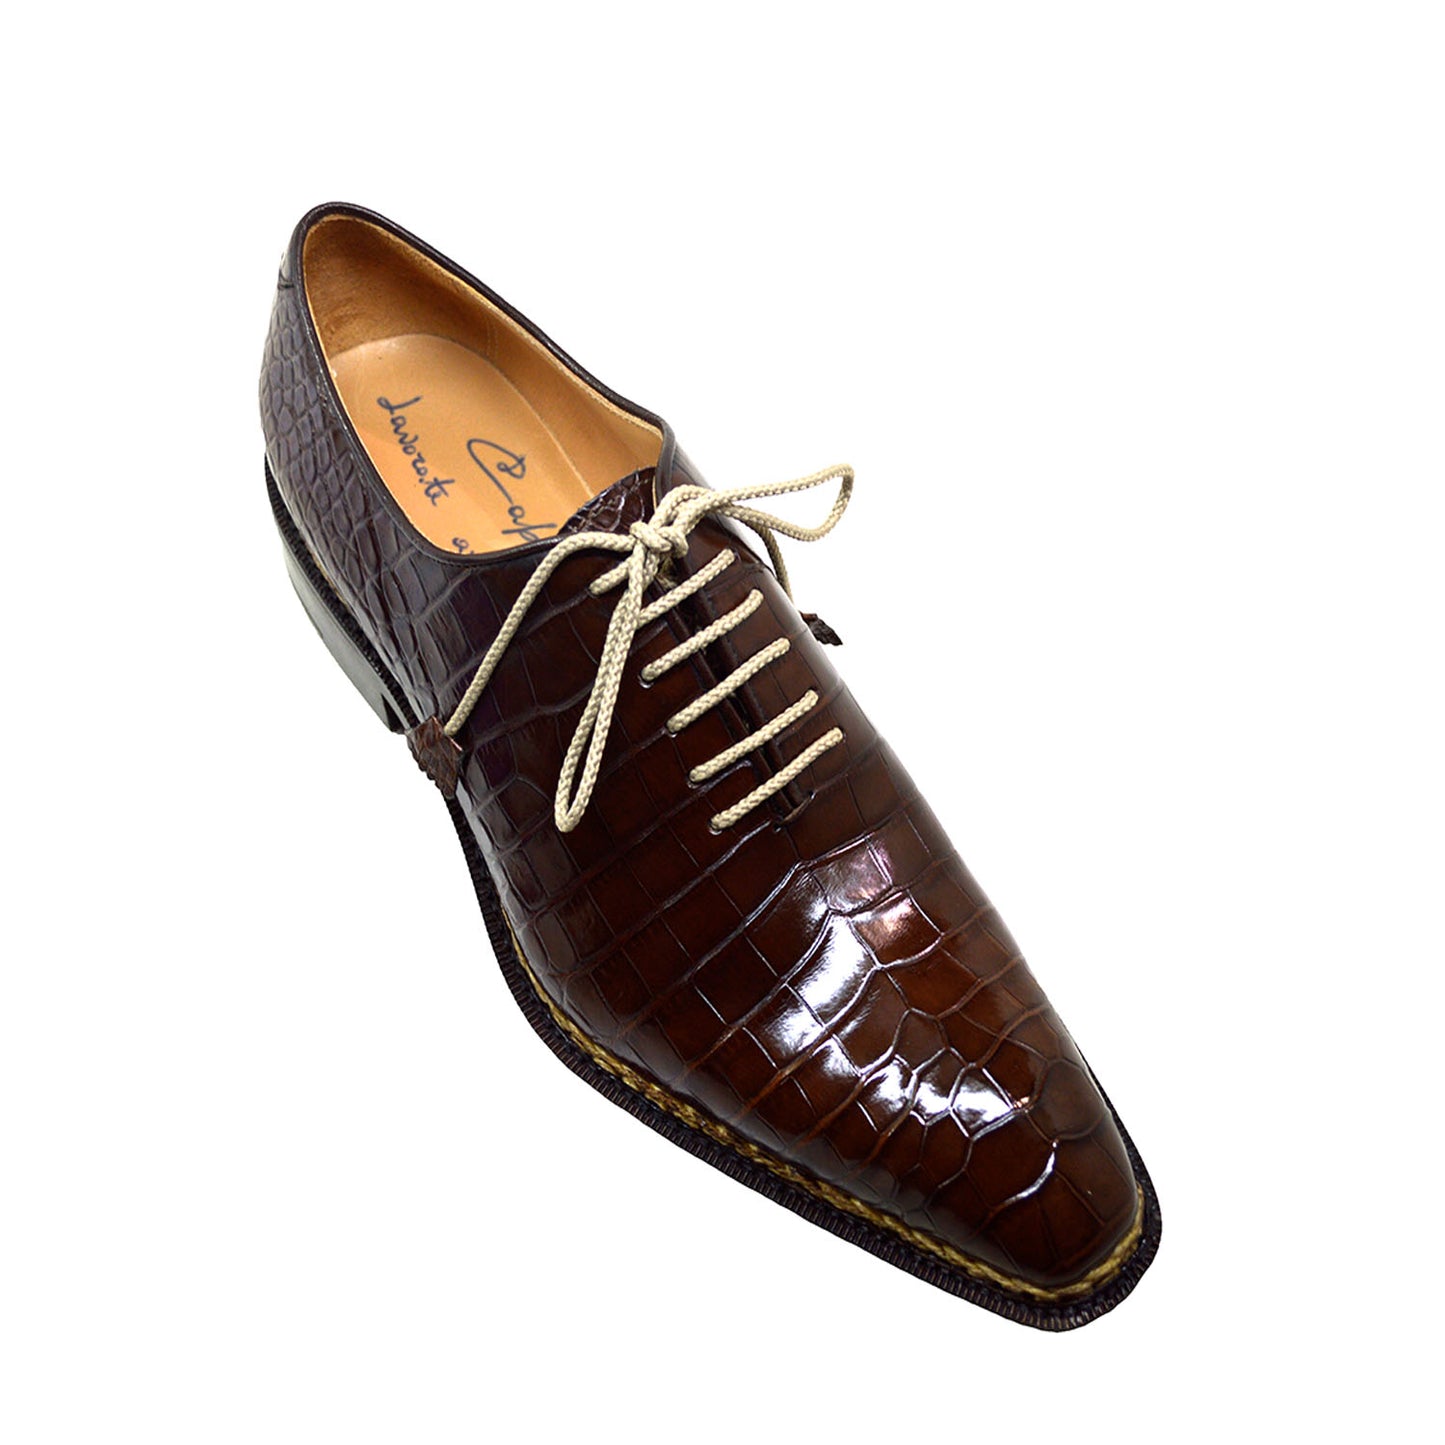 Caporicci 1400 Baby Alligator Lace Up Brown